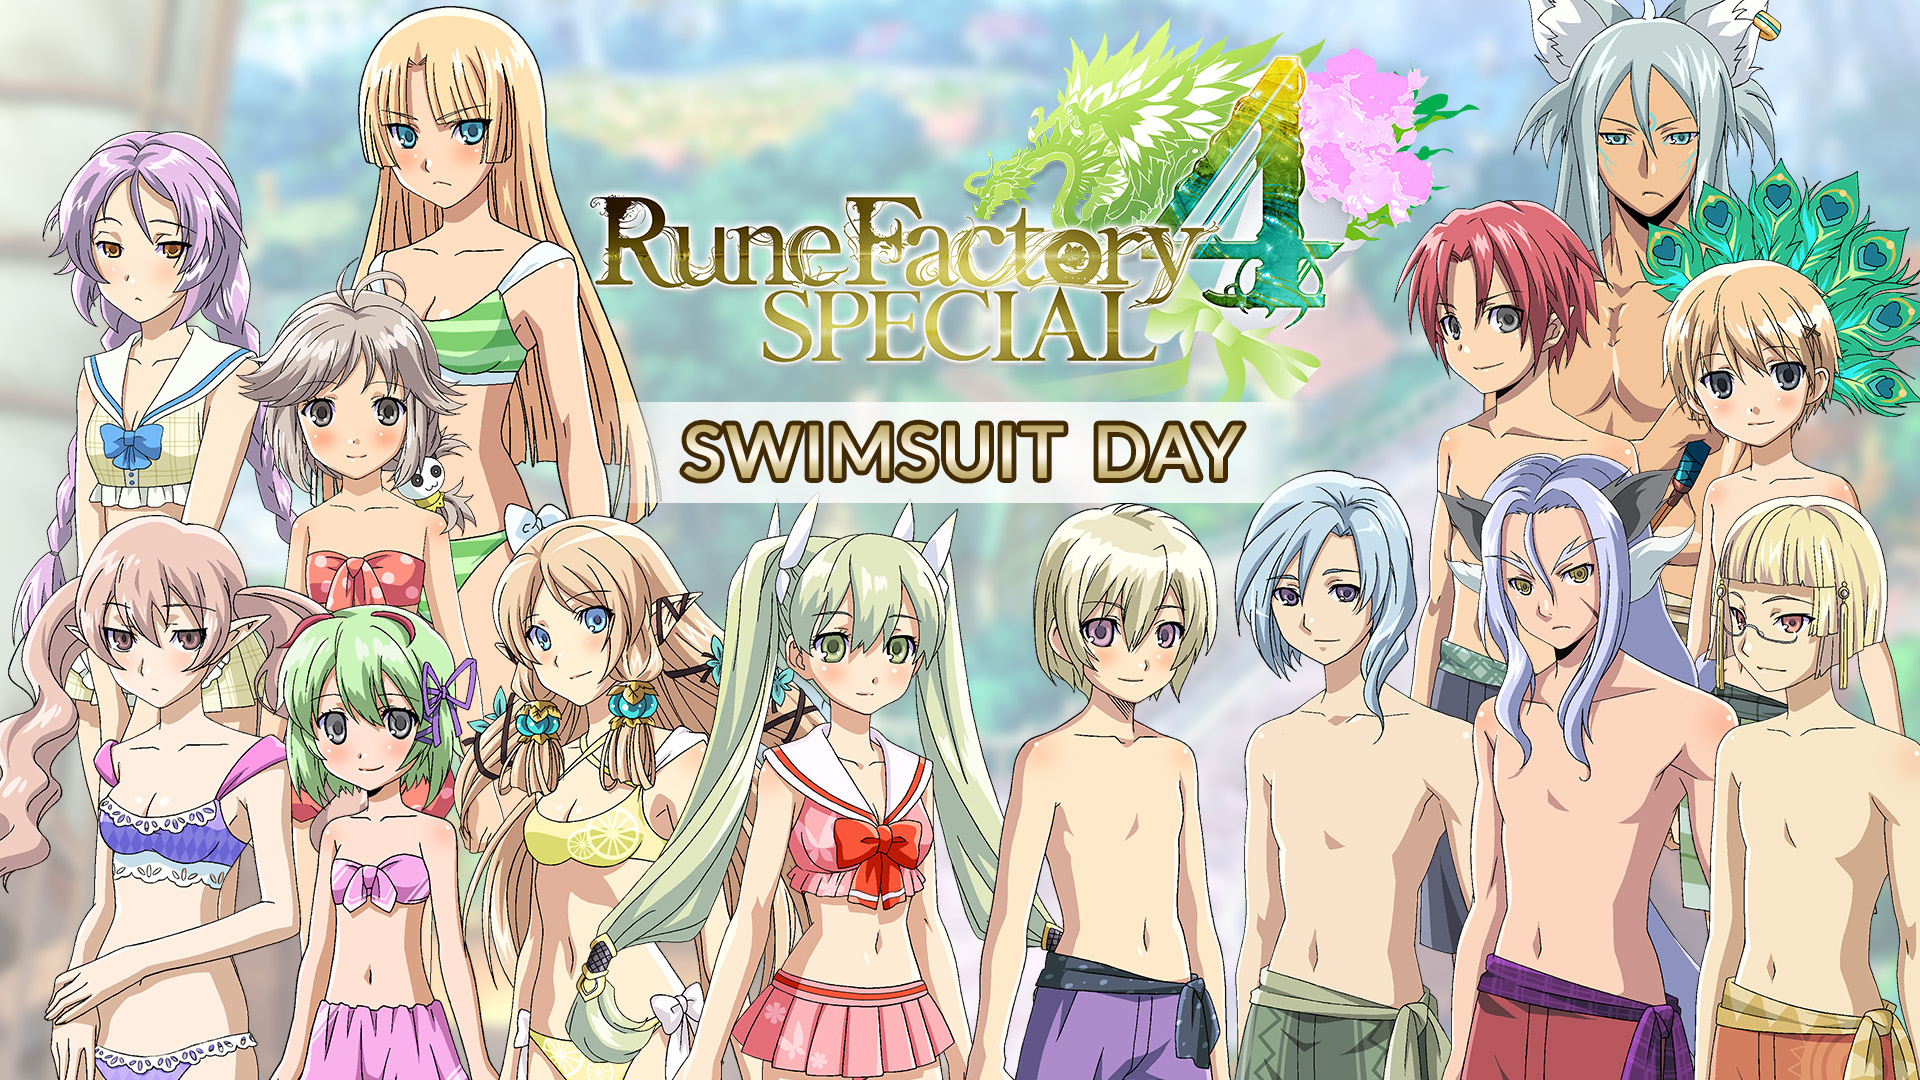 Swimsuit Day